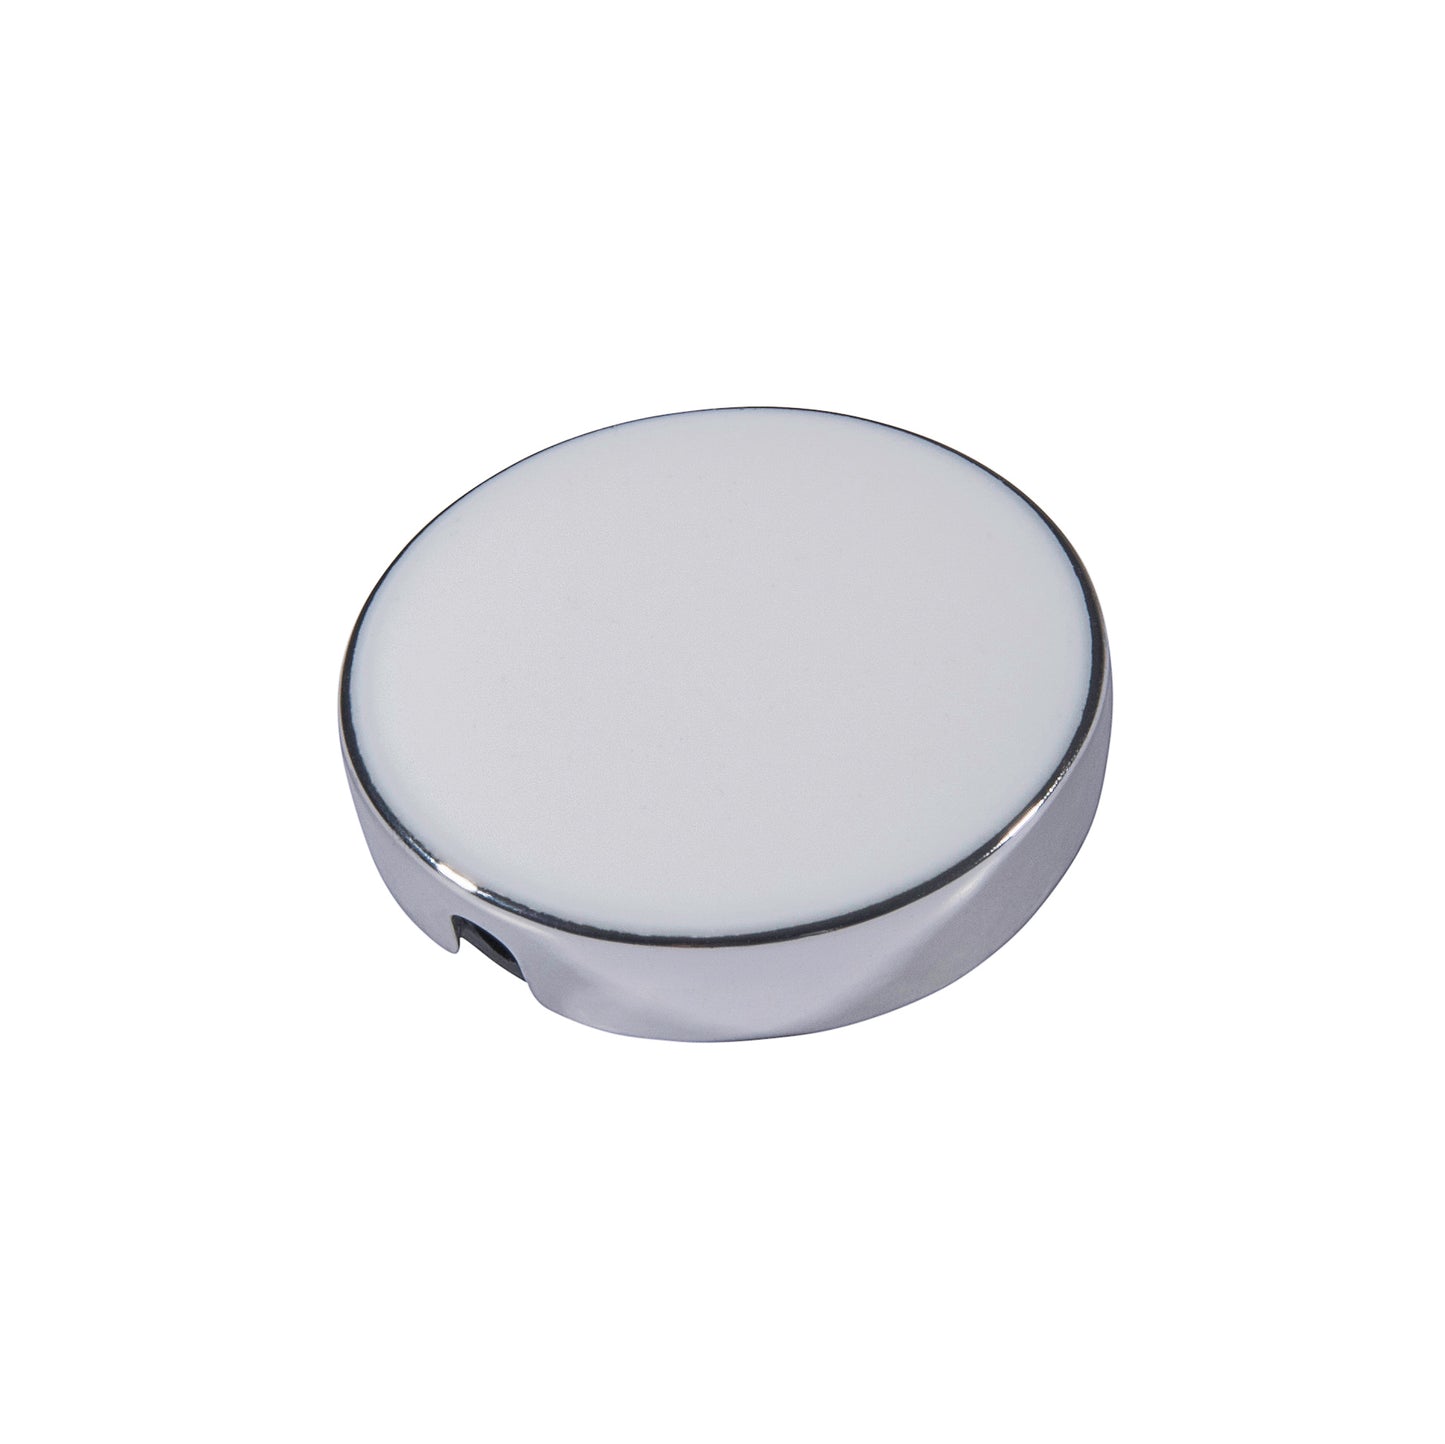 21mm button in shiny silver metal and customizable white enamel